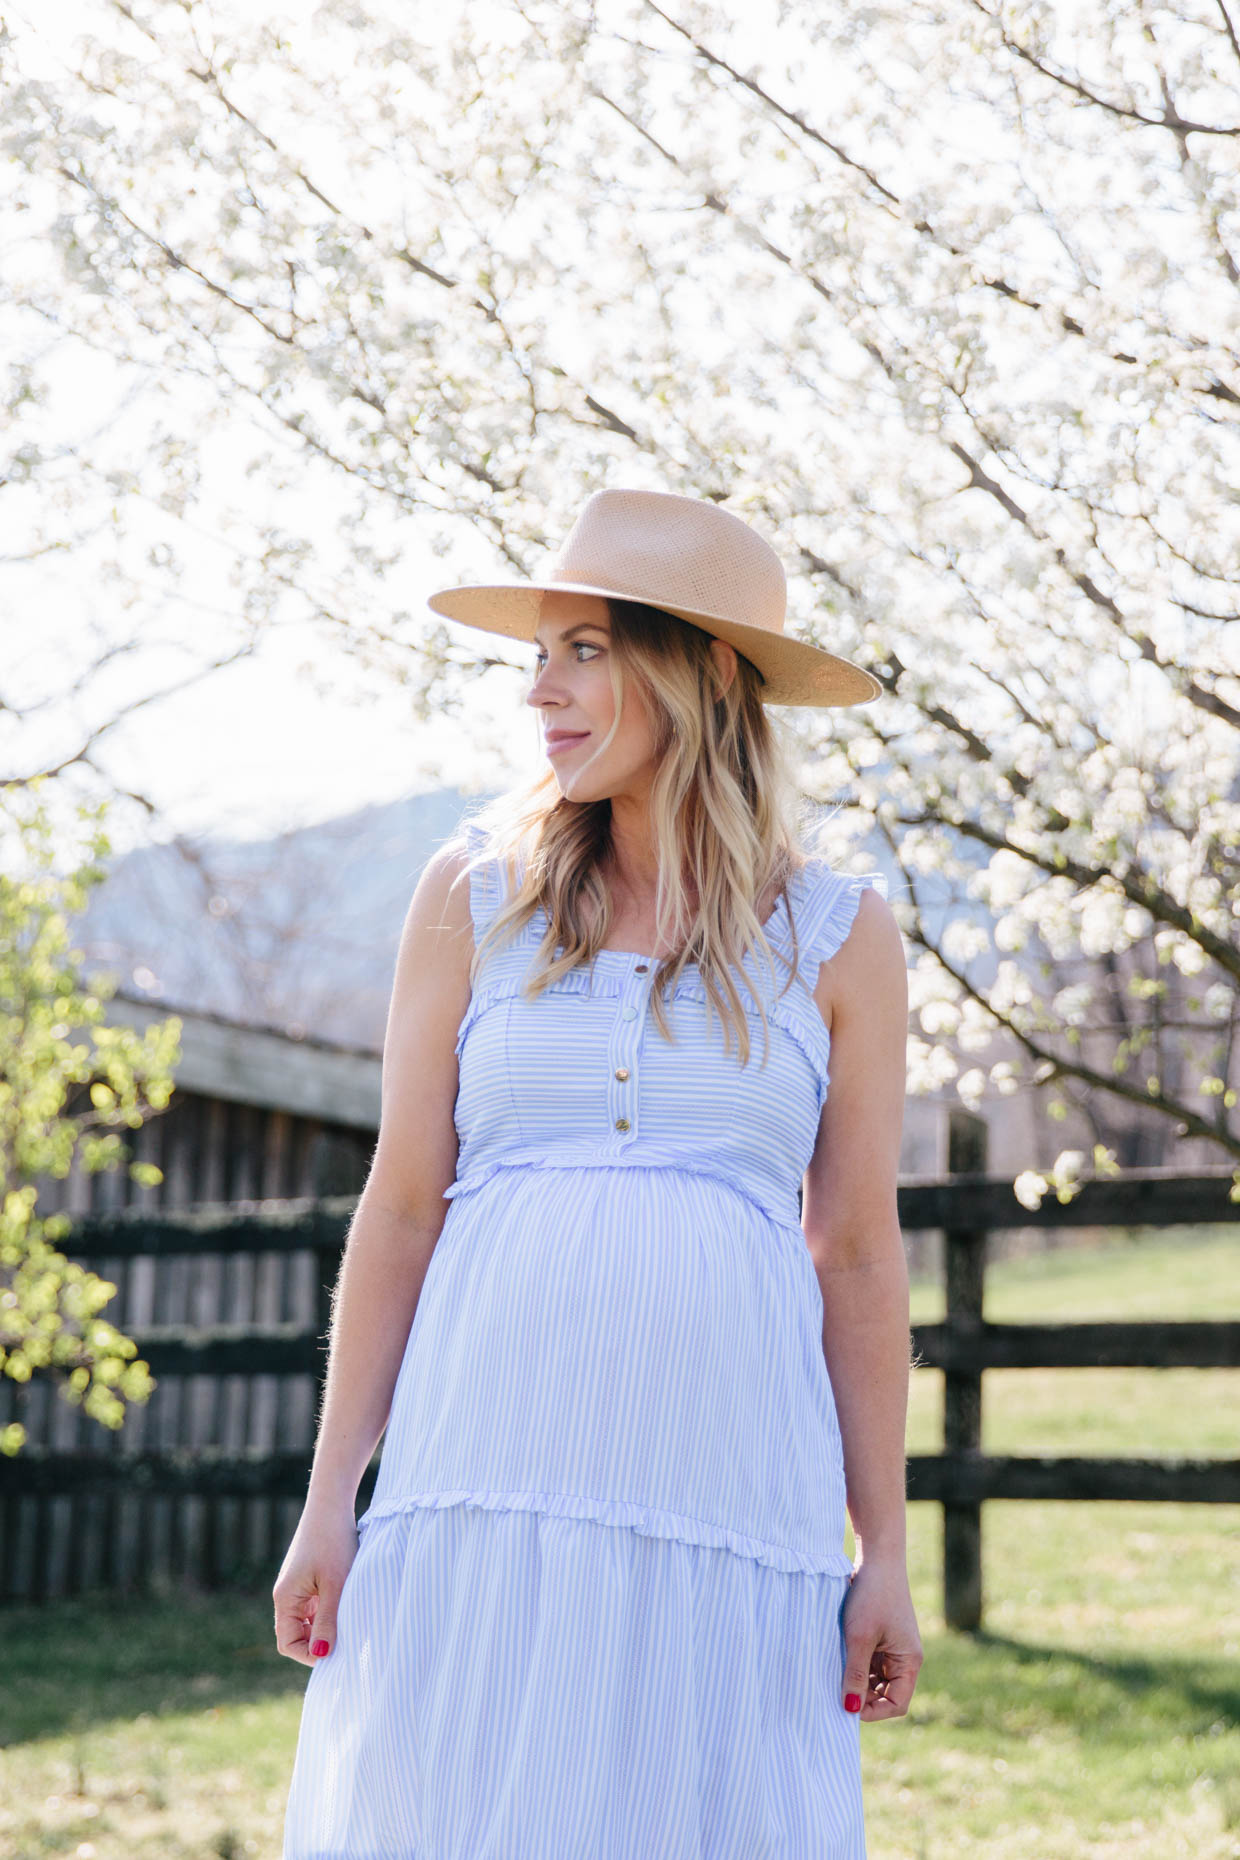 Spring Blooms & A New Sustainable Maternity Brand I'm Loving